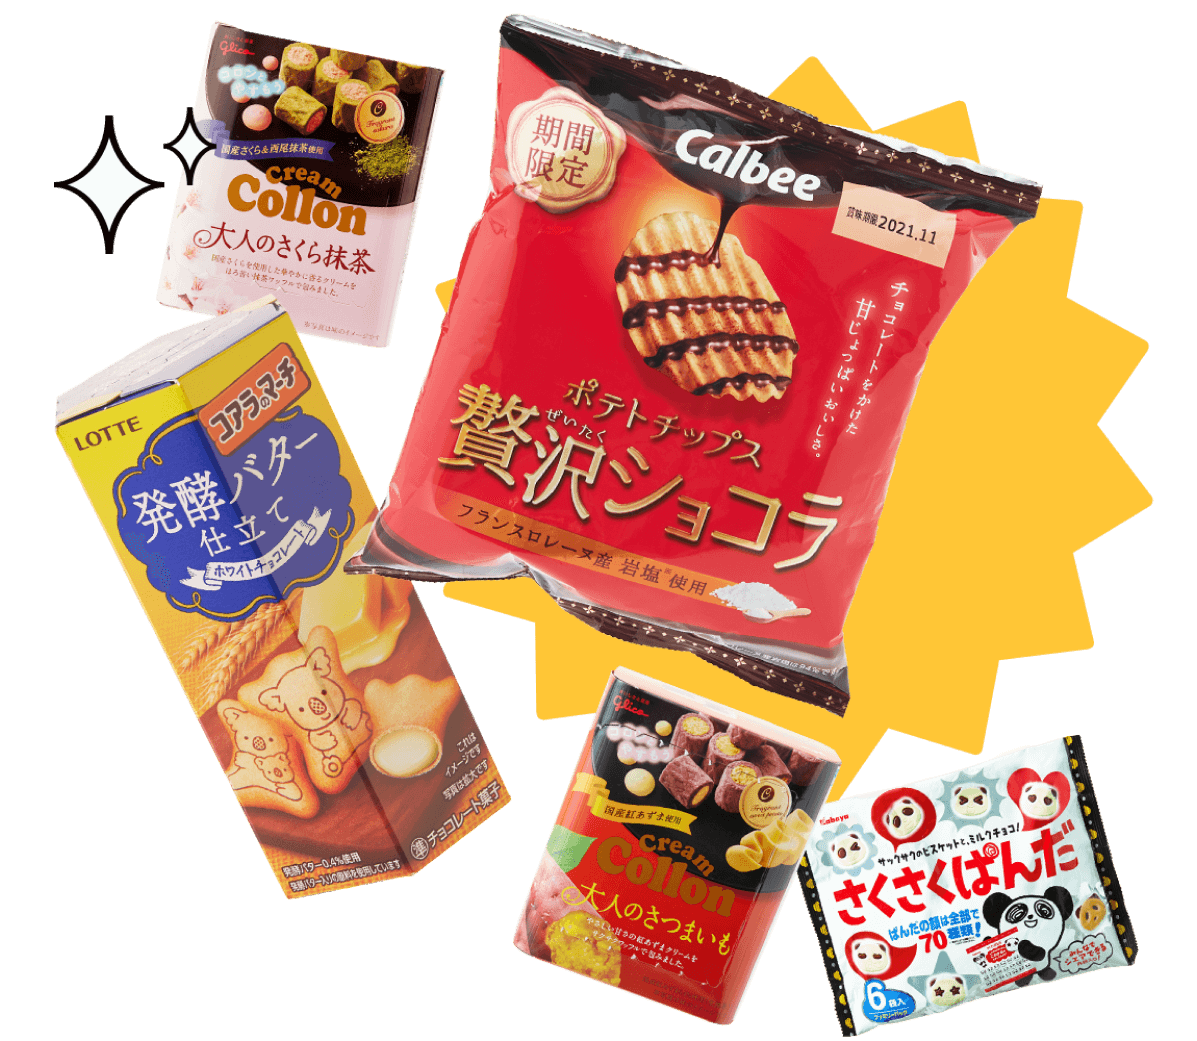 Japanese Cookies and Biscuit: Calbee Chips, Lotte Koala and more